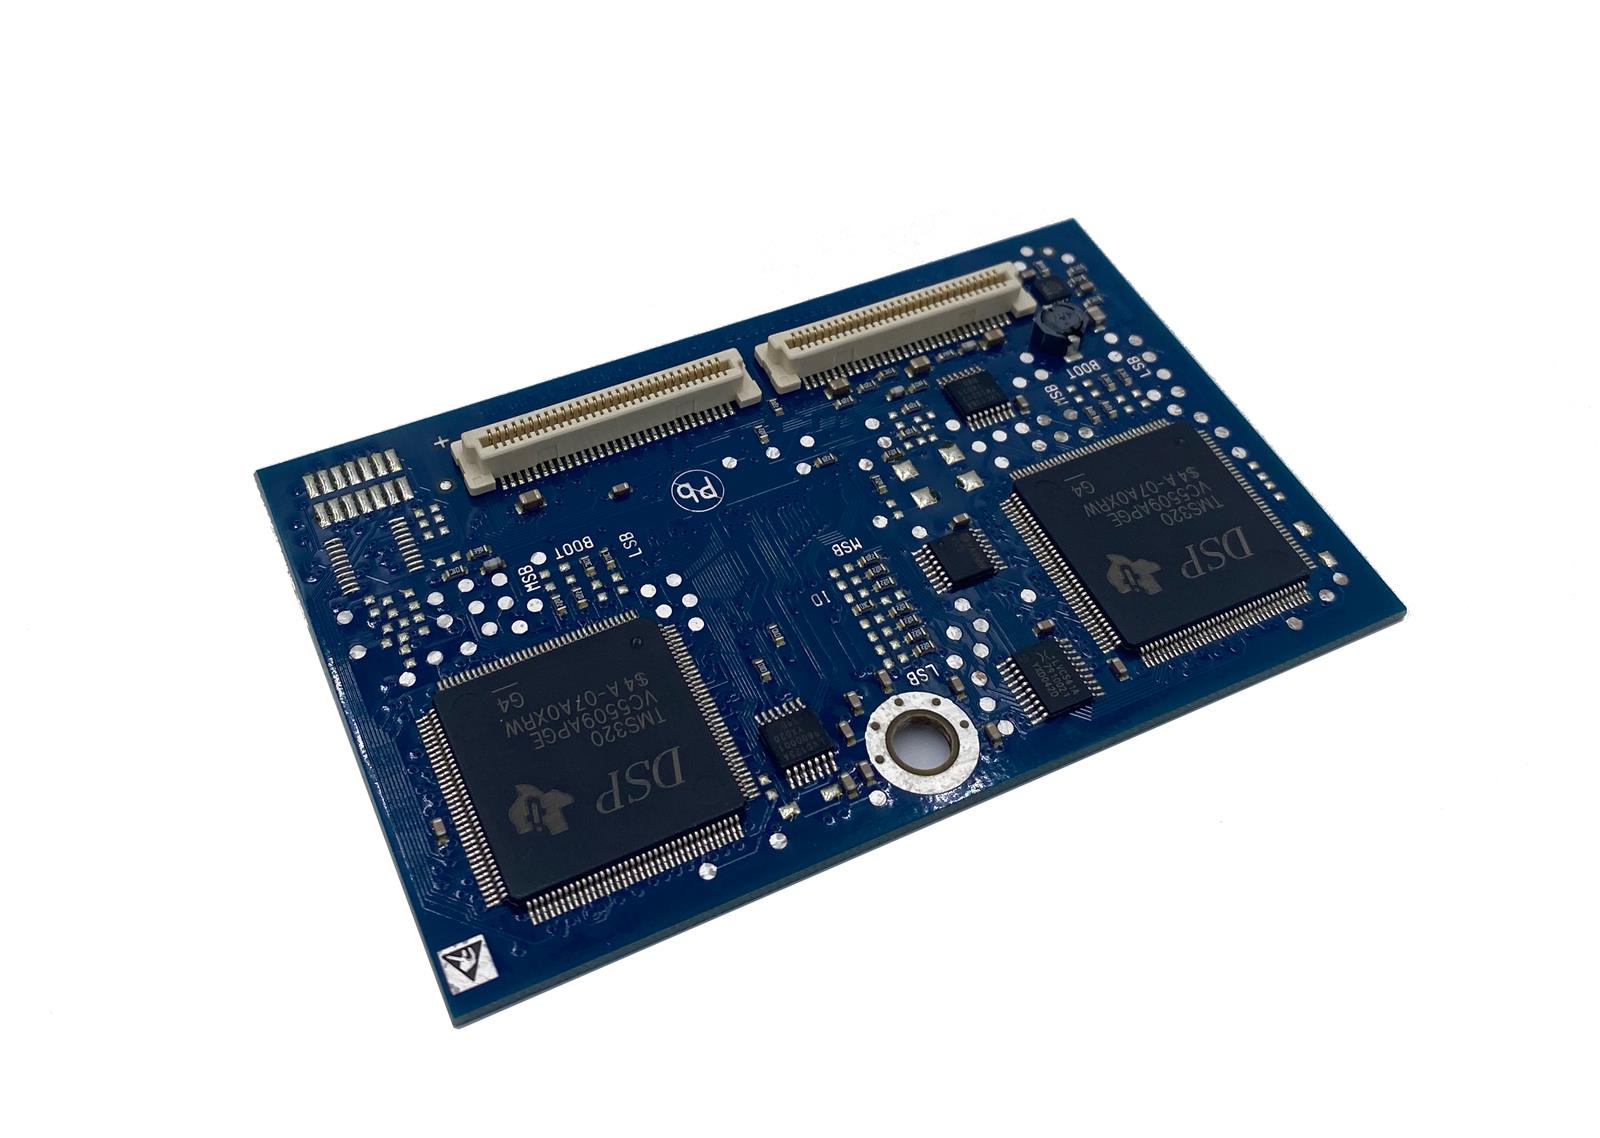 DSP-Modul SM-DSPX2 (2 chipsets)